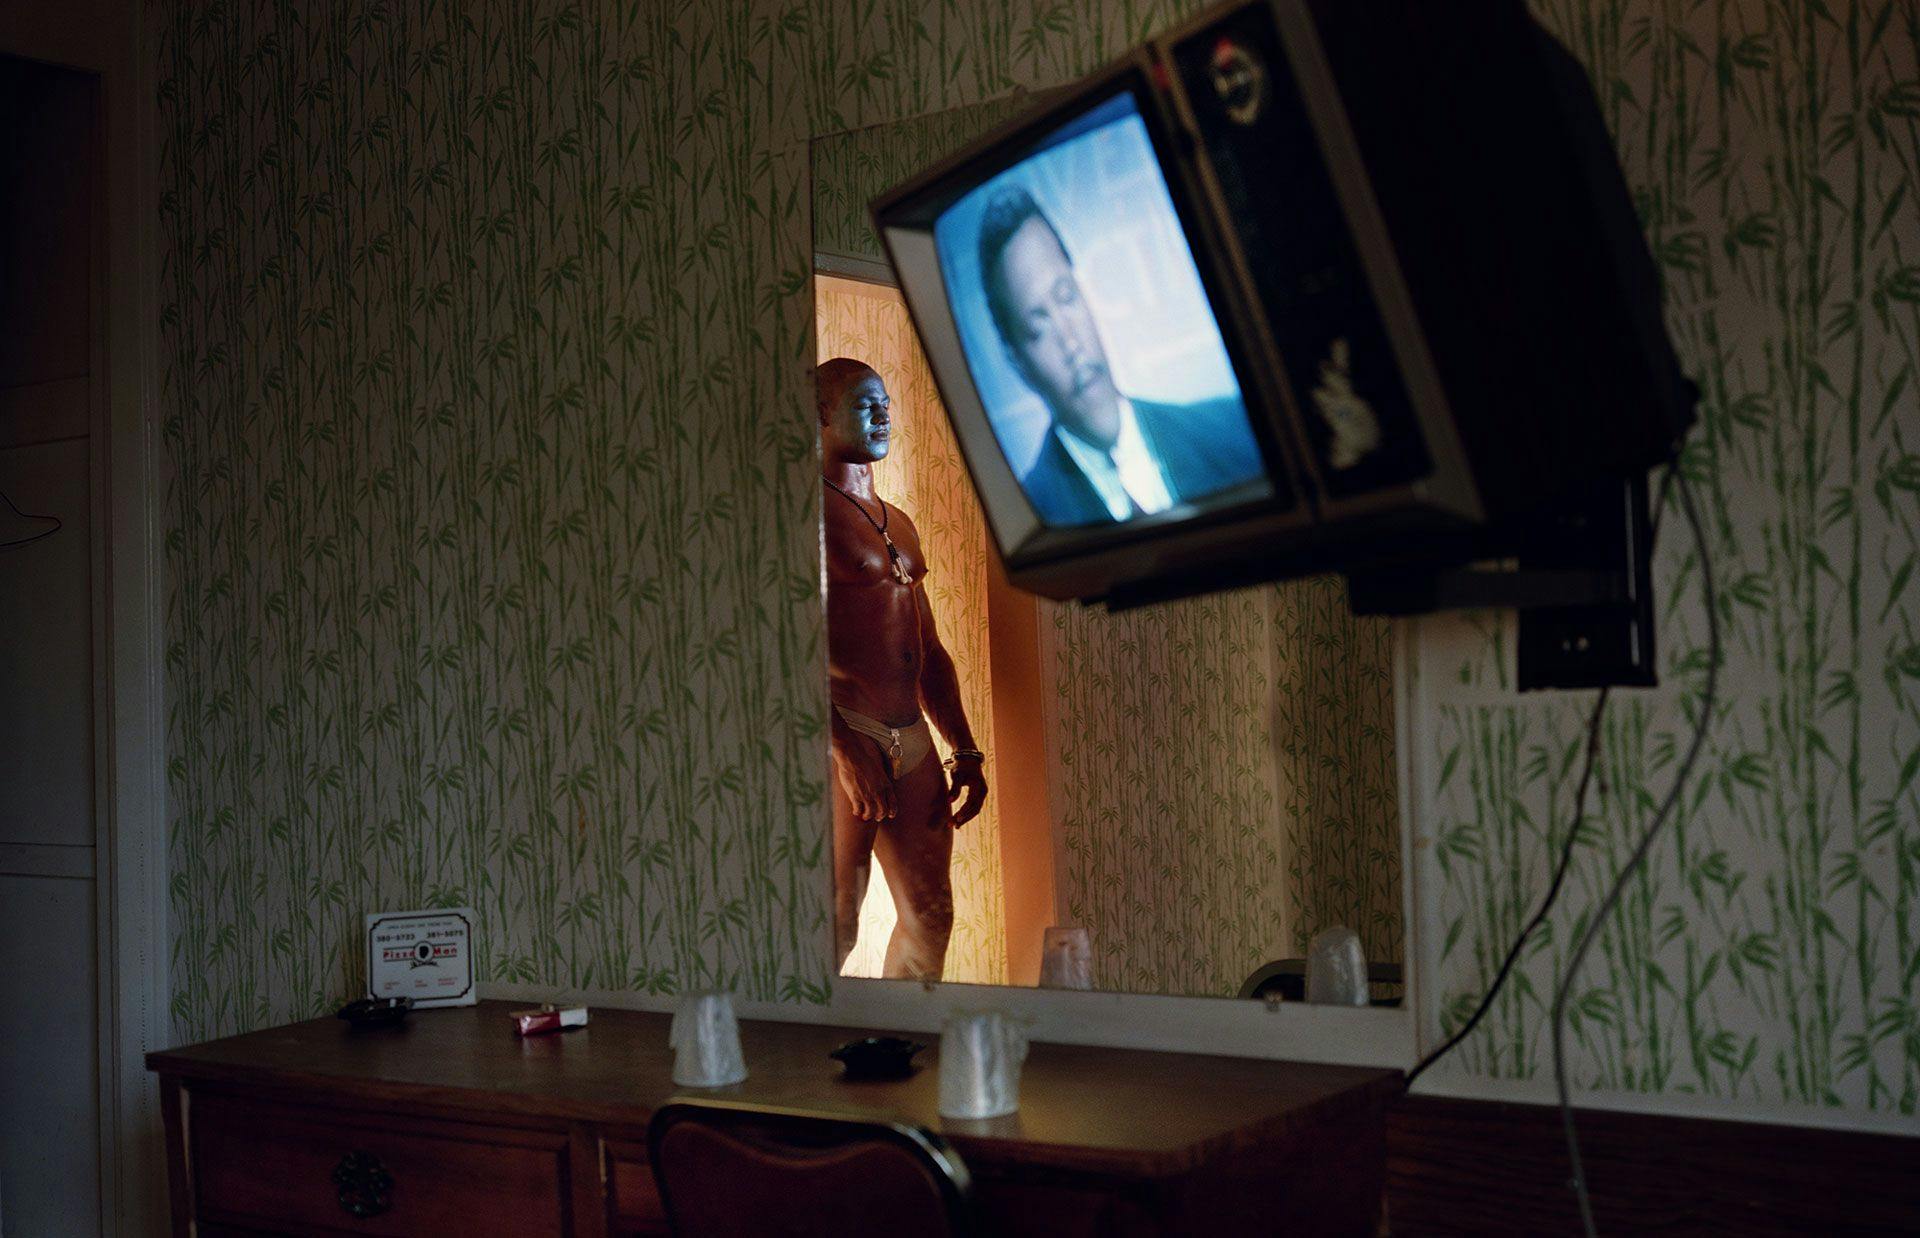 A photograph by Philip-Lorca diCorcia titled Gerald Hughes (a.k.a. Savage Fantasy), about 25 years old, Southern California, $50, dated 1990 to 1992.